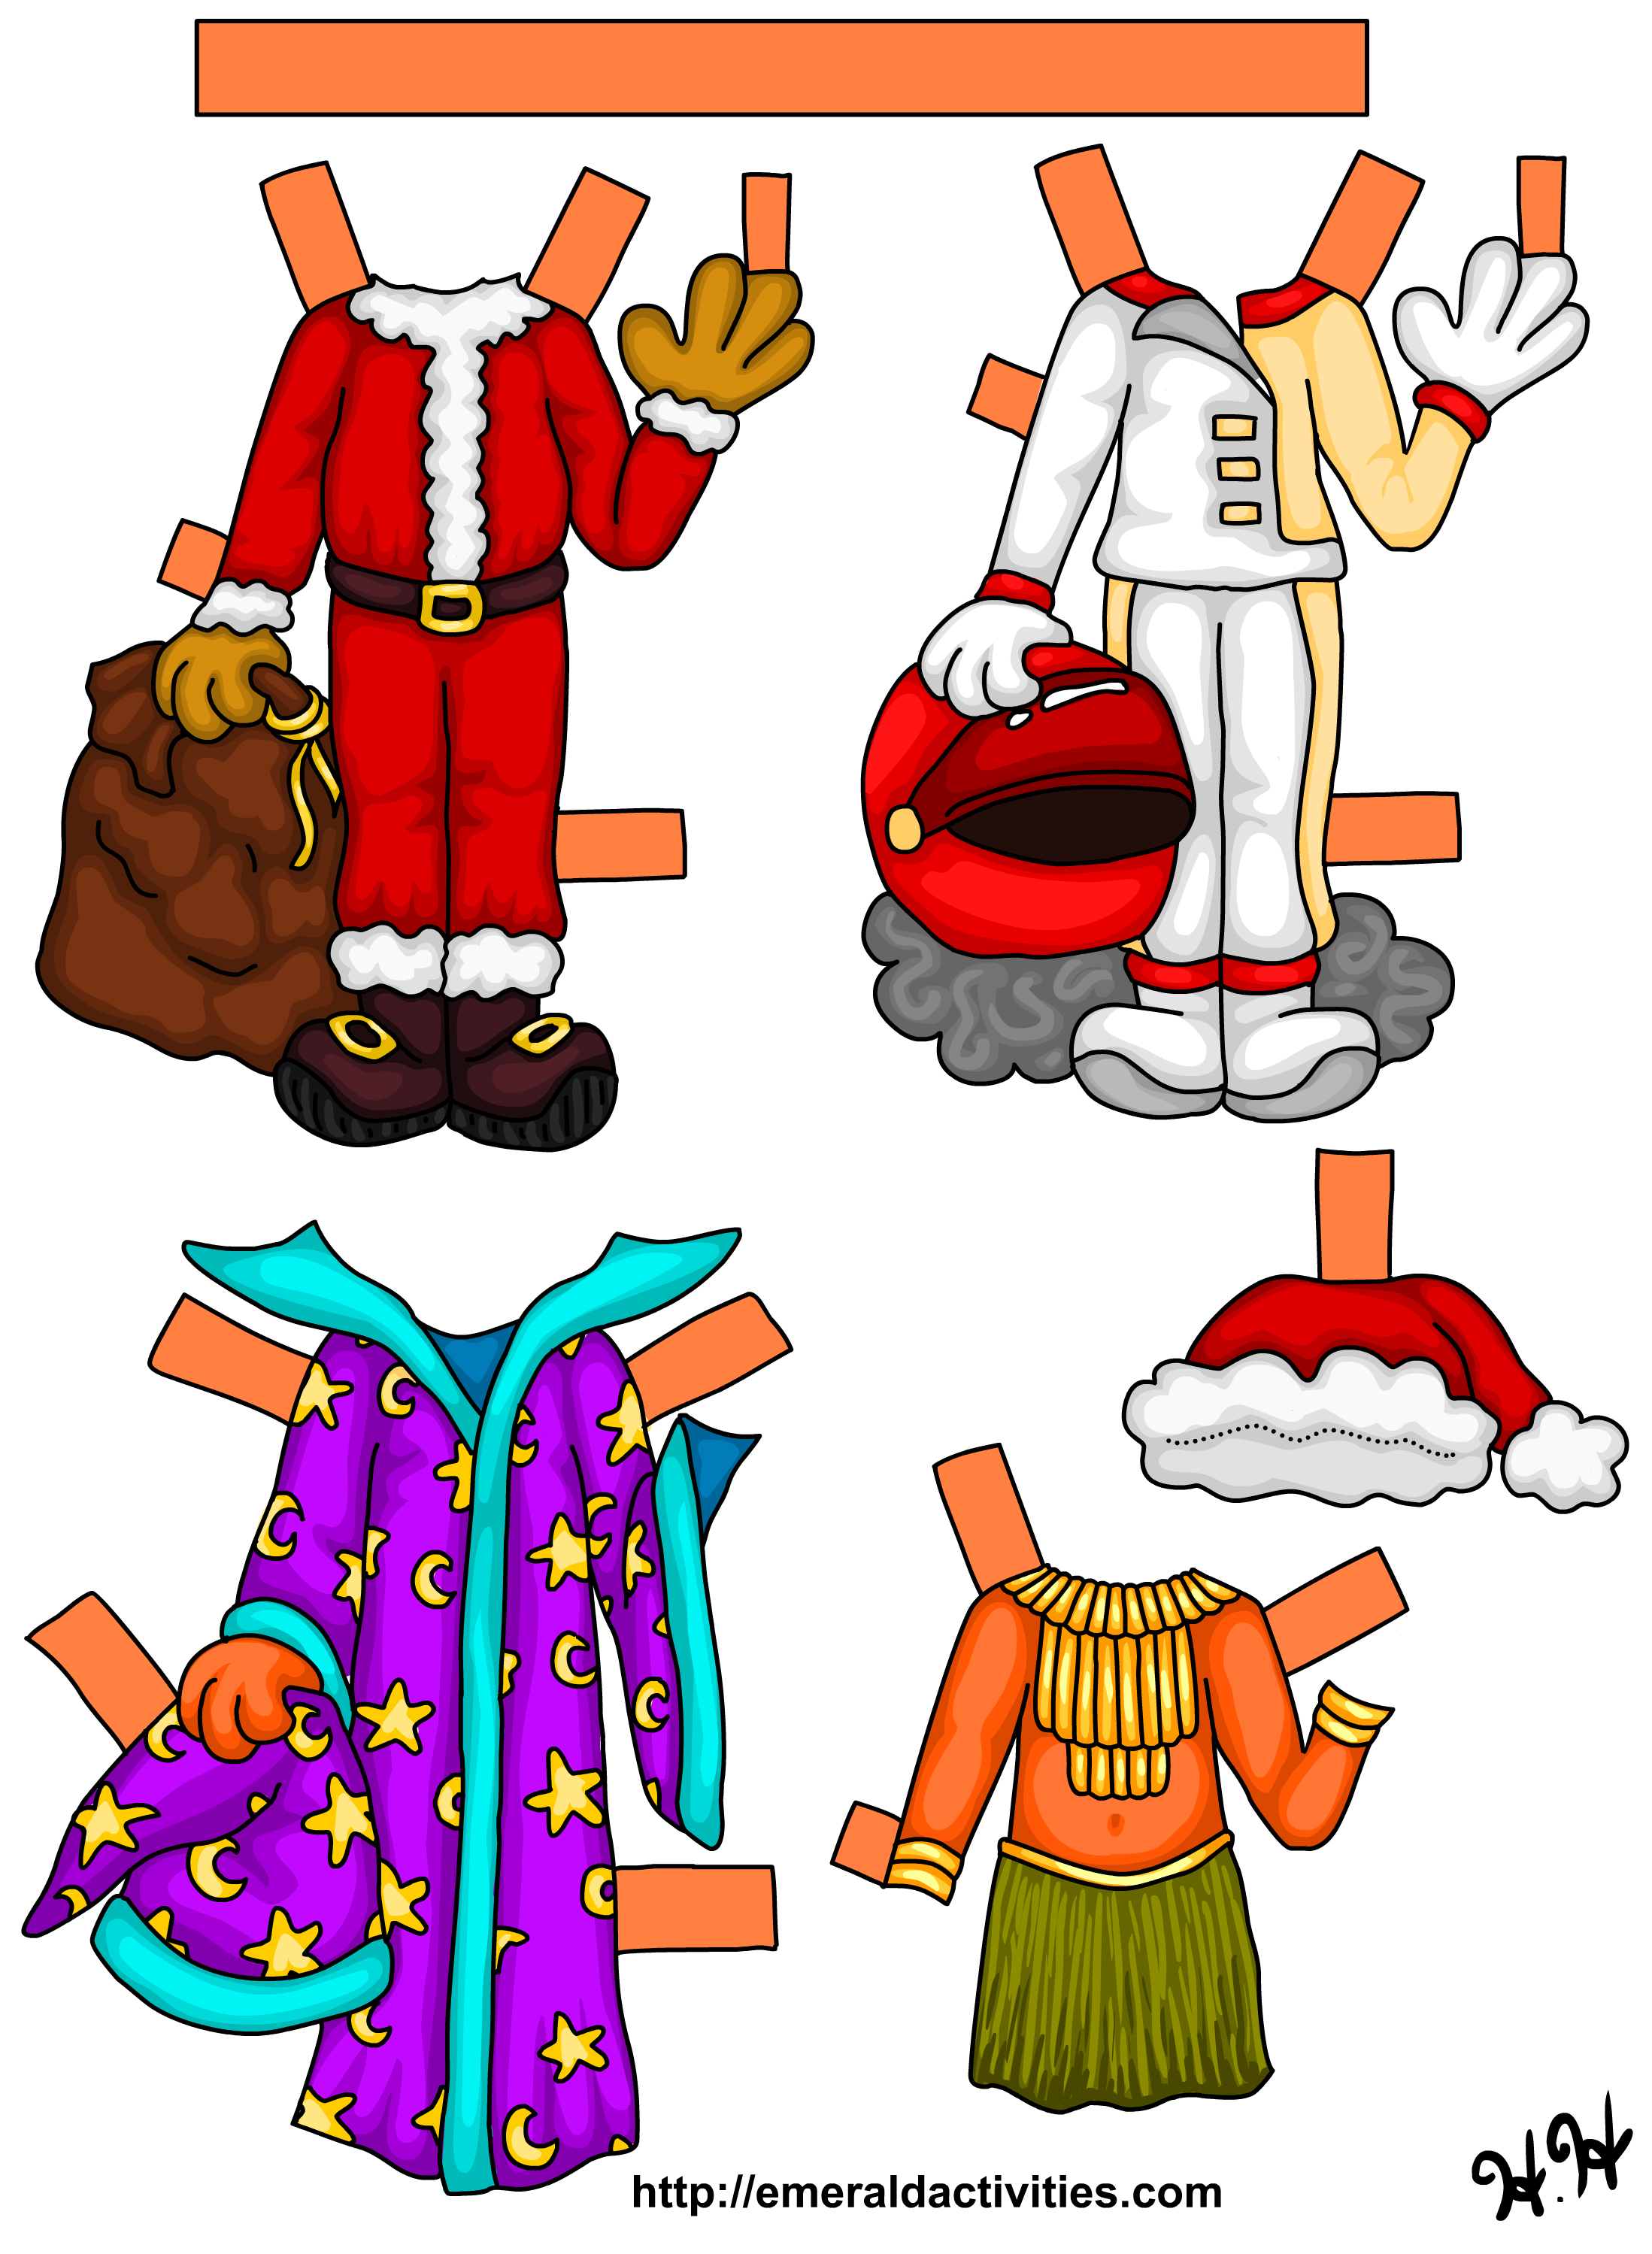 pin-by-barb-polenski-on-papeldolls-93-paper-dolls-halloween-paper